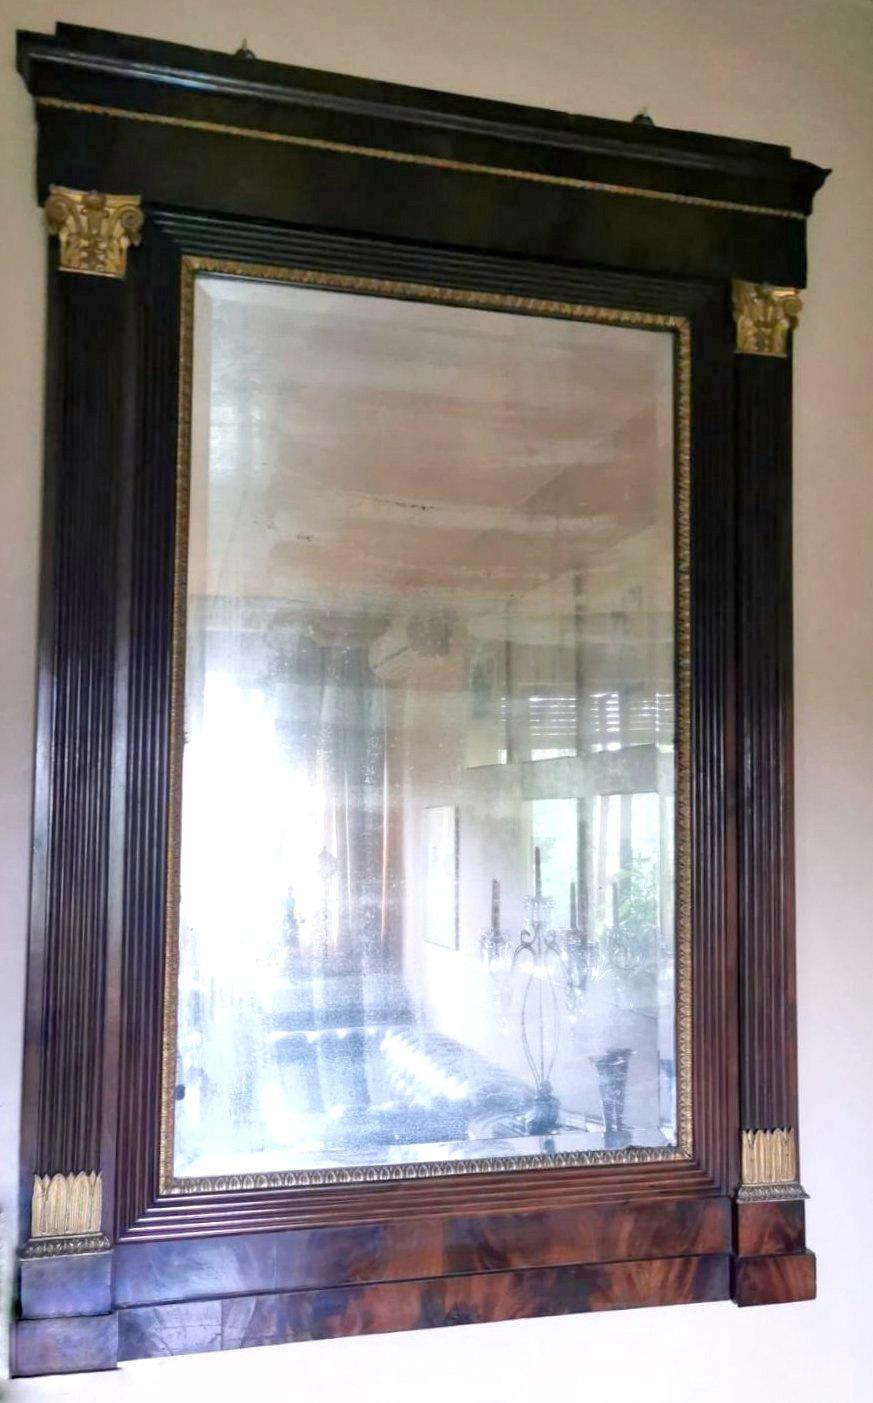 We kindly suggest you read the whole description, because with it we try to give you detailed technical and historical information to guarantee the authenticity of our objects.
Sumptuous and imposing frame in Second Empire style with ground mirror